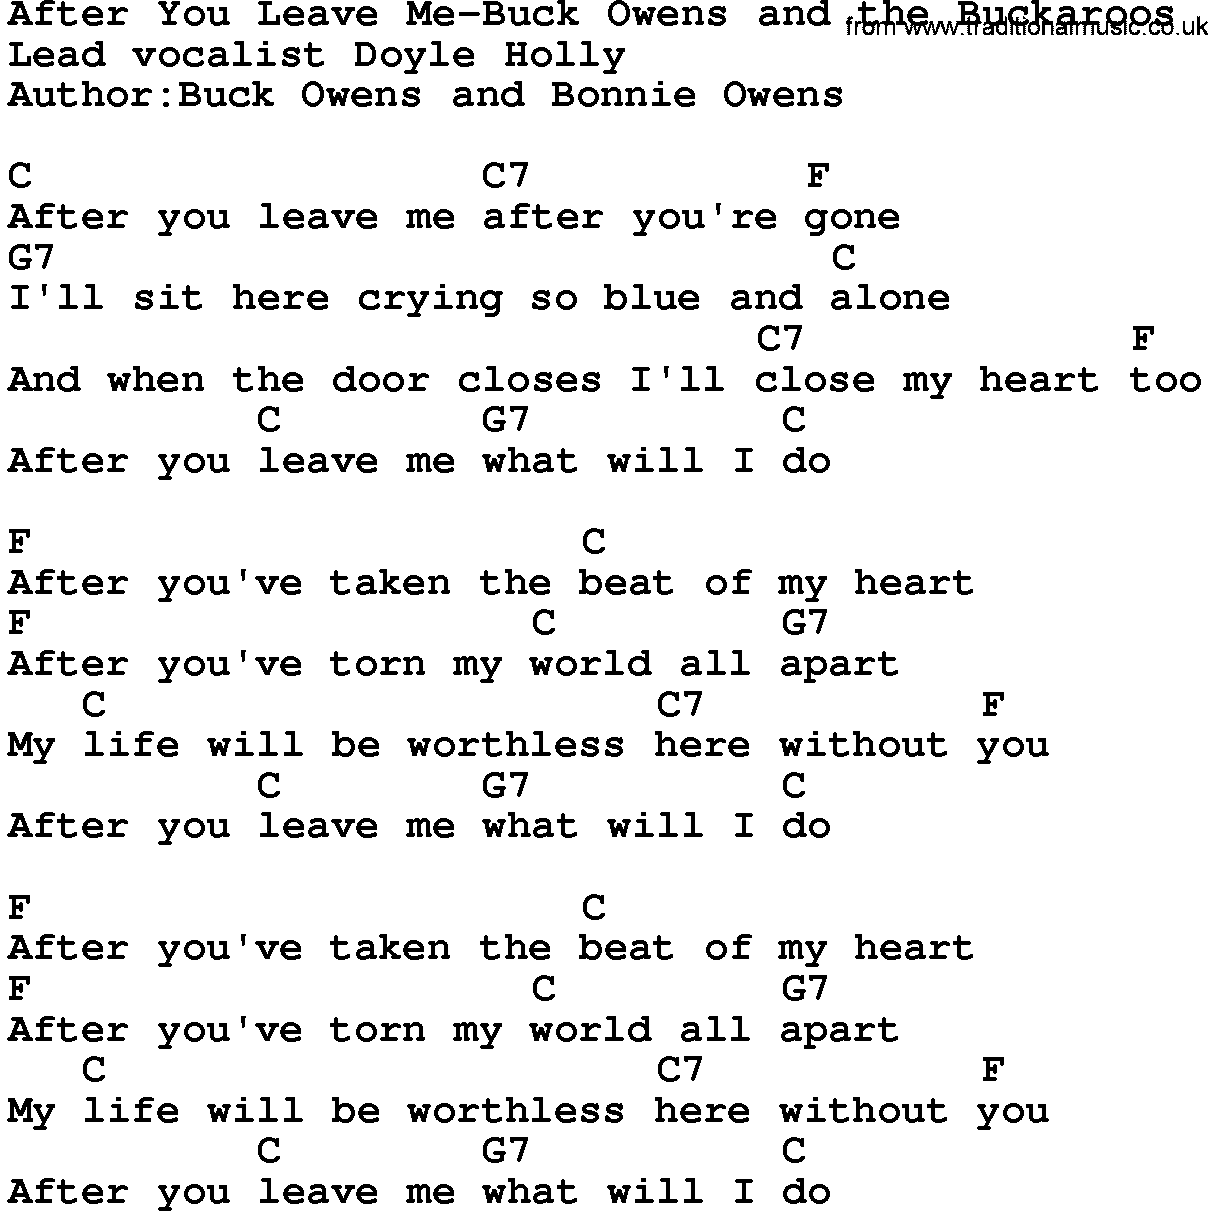 Country music song: After You Leave Me-Buck Owens And The Buckaroos lyrics and chords